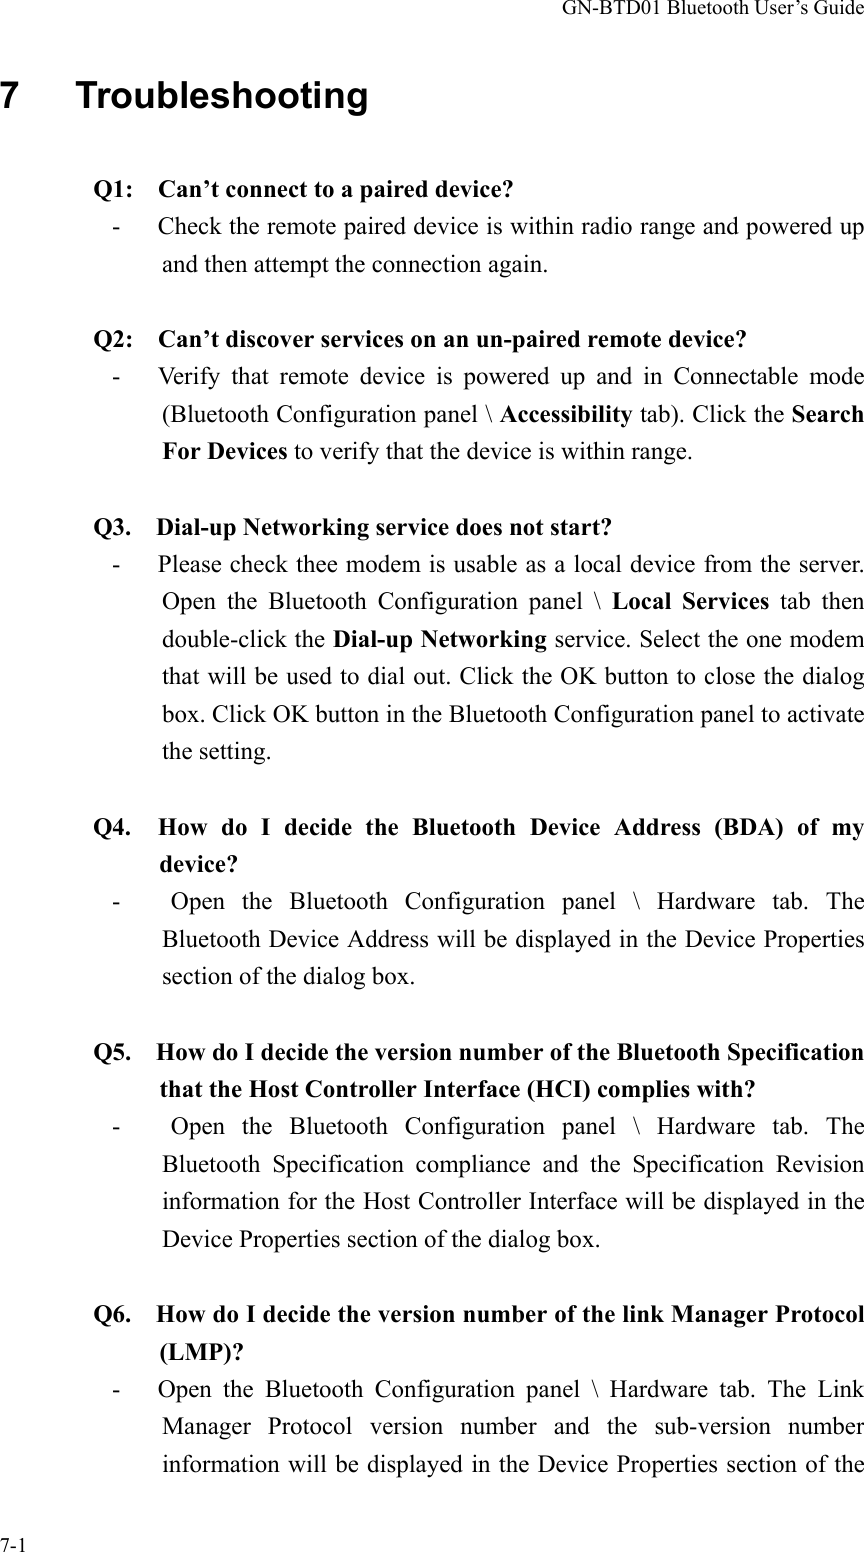 GN-BTD01 Bluetooth User’s Guide 7-1 7   Troubleshooting  Q1:    Can’t connect to a paired device? -      Check the remote paired device is within radio range and powered up and then attempt the connection again.       Q2:    Can’t discover services on an un-paired remote device? -   Verify that remote device is powered up and in Connectable mode (Bluetooth Configuration panel \ Accessibility tab). Click the Search For Devices to verify that the device is within range.  Q3.    Dial-up Networking service does not start? -   Please check thee modem is usable as a local device from the server. Open the Bluetooth Configuration panel \ Local Services tab then double-click the Dial-up Networking service. Select the one modem that will be used to dial out. Click the OK button to close the dialog box. Click OK button in the Bluetooth Configuration panel to activate the setting.  Q4.  How do I decide the Bluetooth Device Address (BDA) of my device? -   Open the Bluetooth Configuration panel \ Hardware tab. The Bluetooth Device Address will be displayed in the Device Properties section of the dialog box.  Q5.    How do I decide the version number of the Bluetooth Specification that the Host Controller Interface (HCI) complies with? -   Open the Bluetooth Configuration panel \ Hardware tab. The Bluetooth Specification compliance and the Specification Revision information for the Host Controller Interface will be displayed in the Device Properties section of the dialog box.  Q6.    How do I decide the version number of the link Manager Protocol (LMP)? -   Open the Bluetooth Configuration panel \ Hardware tab. The Link Manager Protocol version number and the sub-version number information will be displayed in the Device Properties section of the 